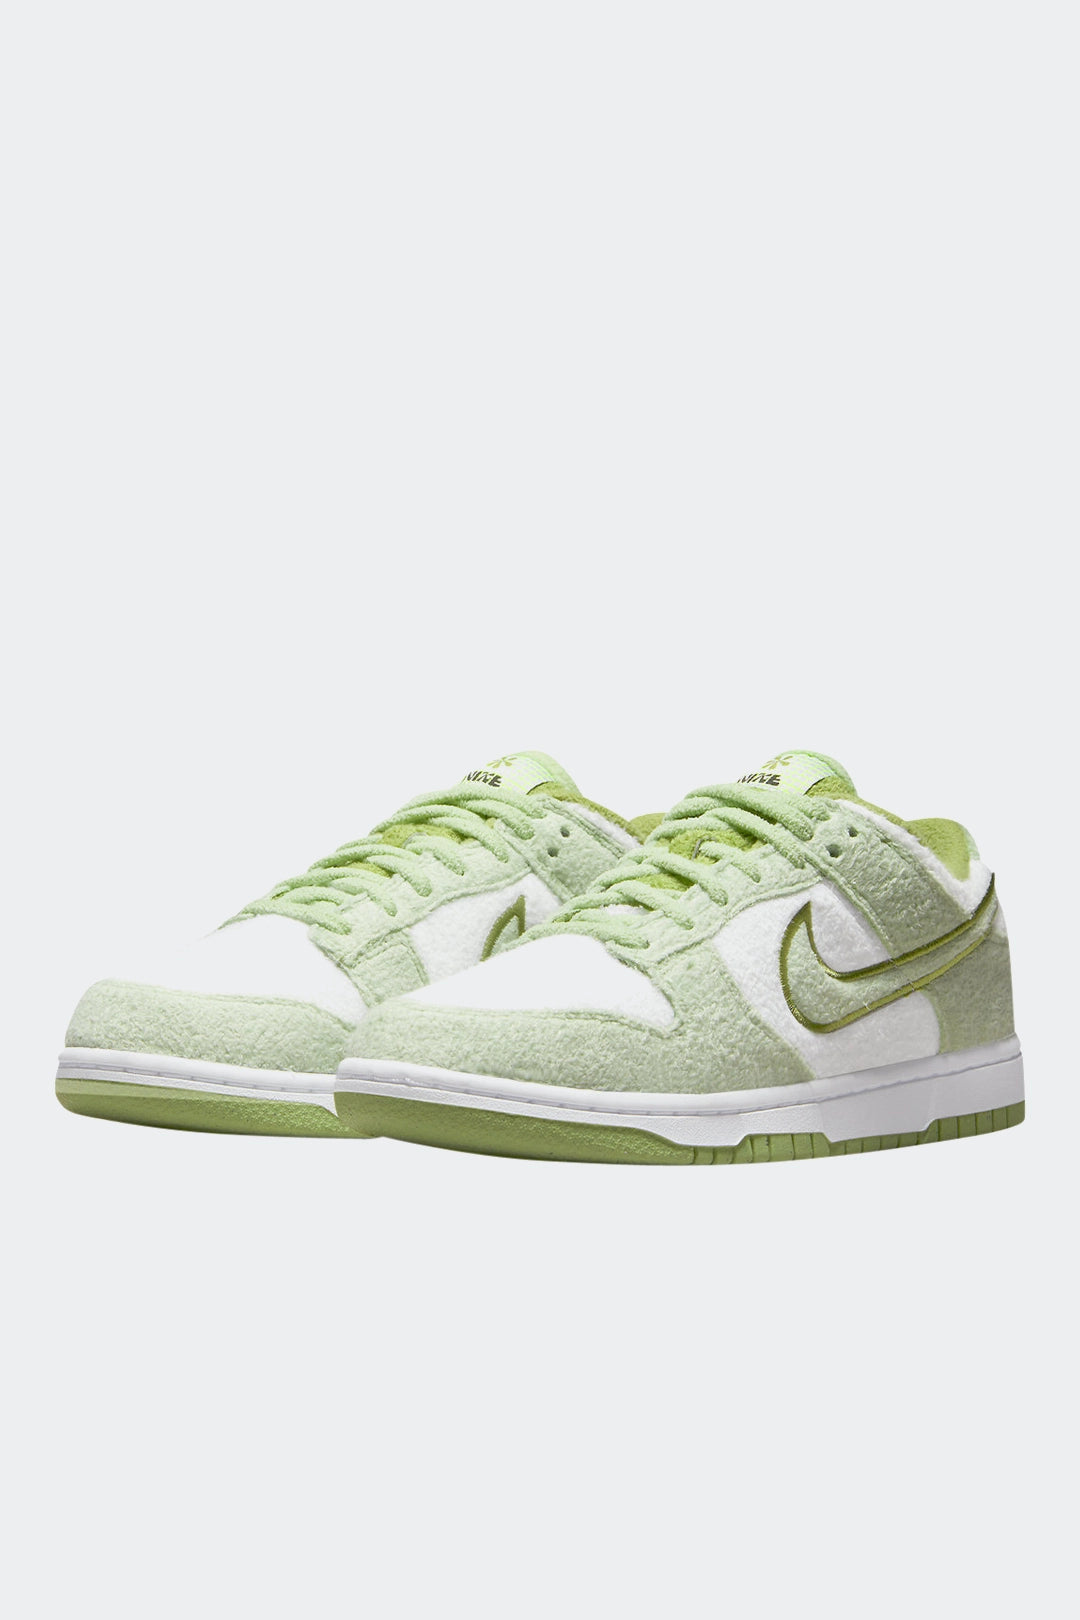 NIKE DUNK LOW SE - MUJER - HYPE